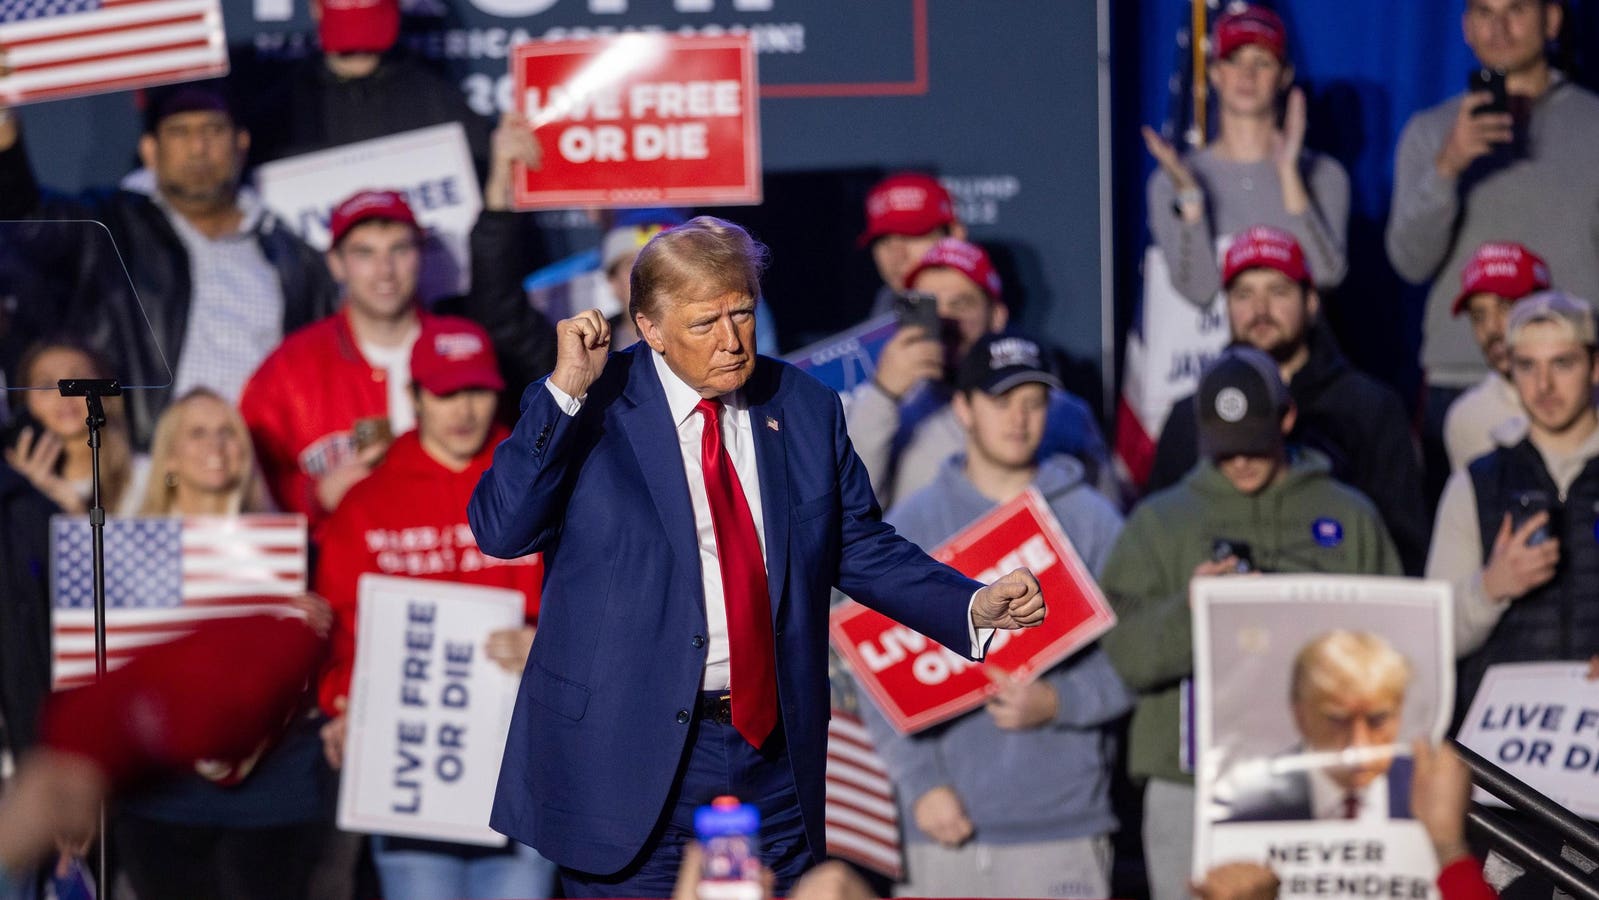 Trump Leads Biden In New Hampshire After Debate, Poll Finds—Which GOP Hasn’t Won In 24 Years